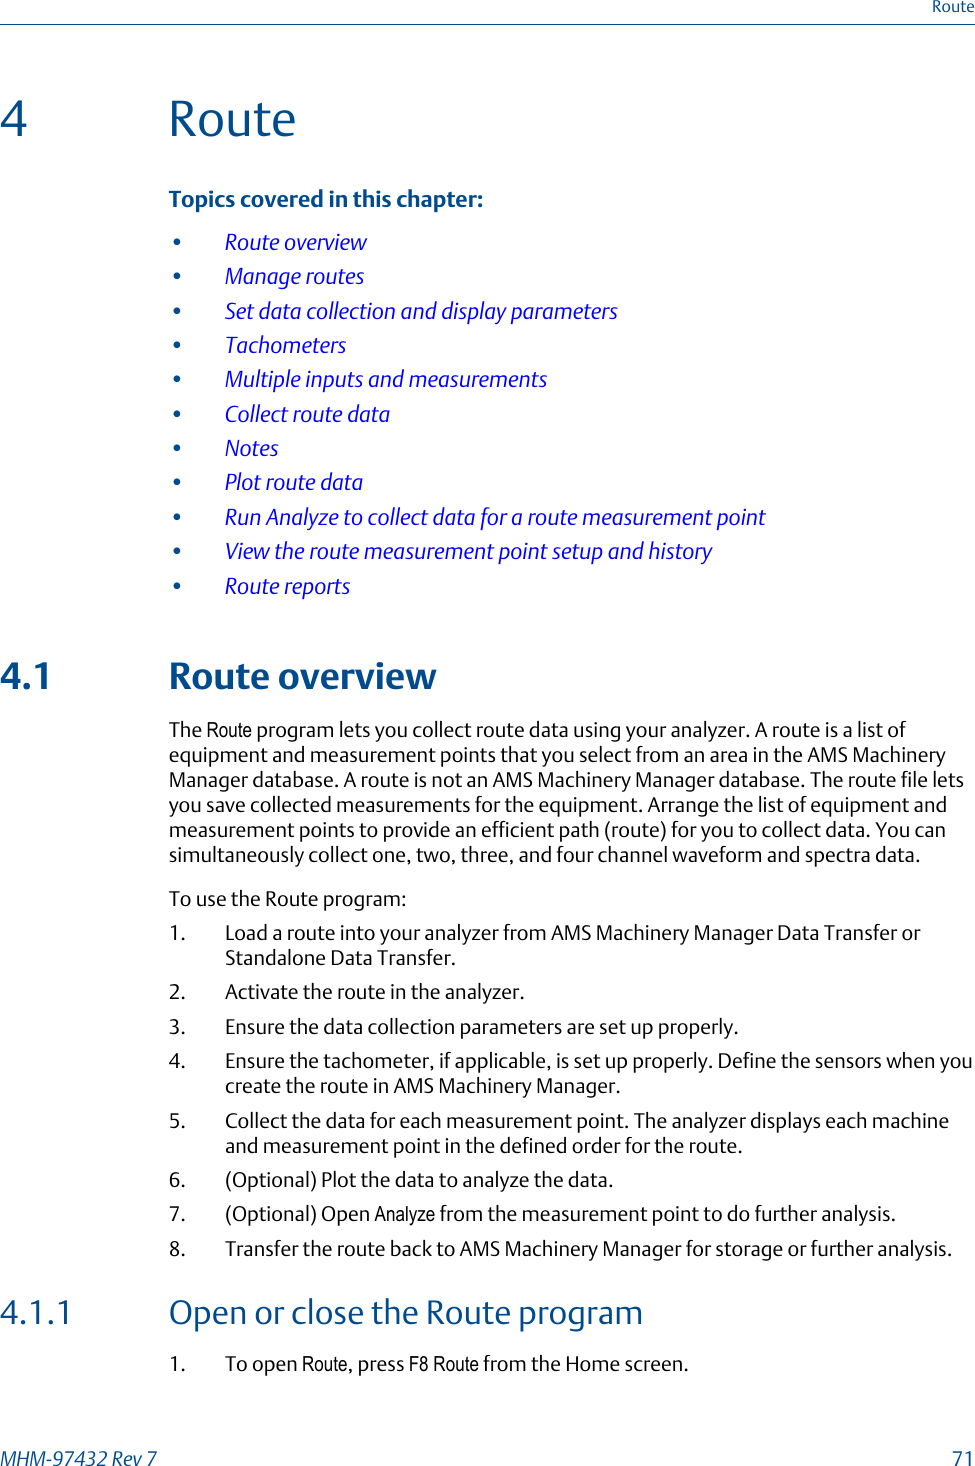 4 RouteTopics covered in this chapter:•Route overview•Manage routes•Set data collection and display parameters•Tachometers•Multiple inputs and measurements•Collect route data•Notes•Plot route data•Run Analyze to collect data for a route measurement point•View the route measurement point setup and history•Route reports4.1 Route overviewThe Route program lets you collect route data using your analyzer. A route is a list ofequipment and measurement points that you select from an area in the AMS MachineryManager database. A route is not an AMS Machinery Manager database. The route file letsyou save collected measurements for the equipment. Arrange the list of equipment andmeasurement points to provide an efficient path (route) for you to collect data. You cansimultaneously collect one, two, three, and four channel waveform and spectra data.To use the Route program:1. Load a route into your analyzer from AMS Machinery Manager Data Transfer orStandalone Data Transfer.2. Activate the route in the analyzer.3. Ensure the data collection parameters are set up properly.4. Ensure the tachometer, if applicable, is set up properly. Define the sensors when youcreate the route in AMS Machinery Manager.5. Collect the data for each measurement point. The analyzer displays each machineand measurement point in the defined order for the route.6. (Optional) Plot the data to analyze the data.7. (Optional) Open Analyze from the measurement point to do further analysis.8. Transfer the route back to AMS Machinery Manager for storage or further analysis.4.1.1 Open or close the Route program1. To open Route, press F8 Route from the Home screen.RouteMHM-97432 Rev 7  71